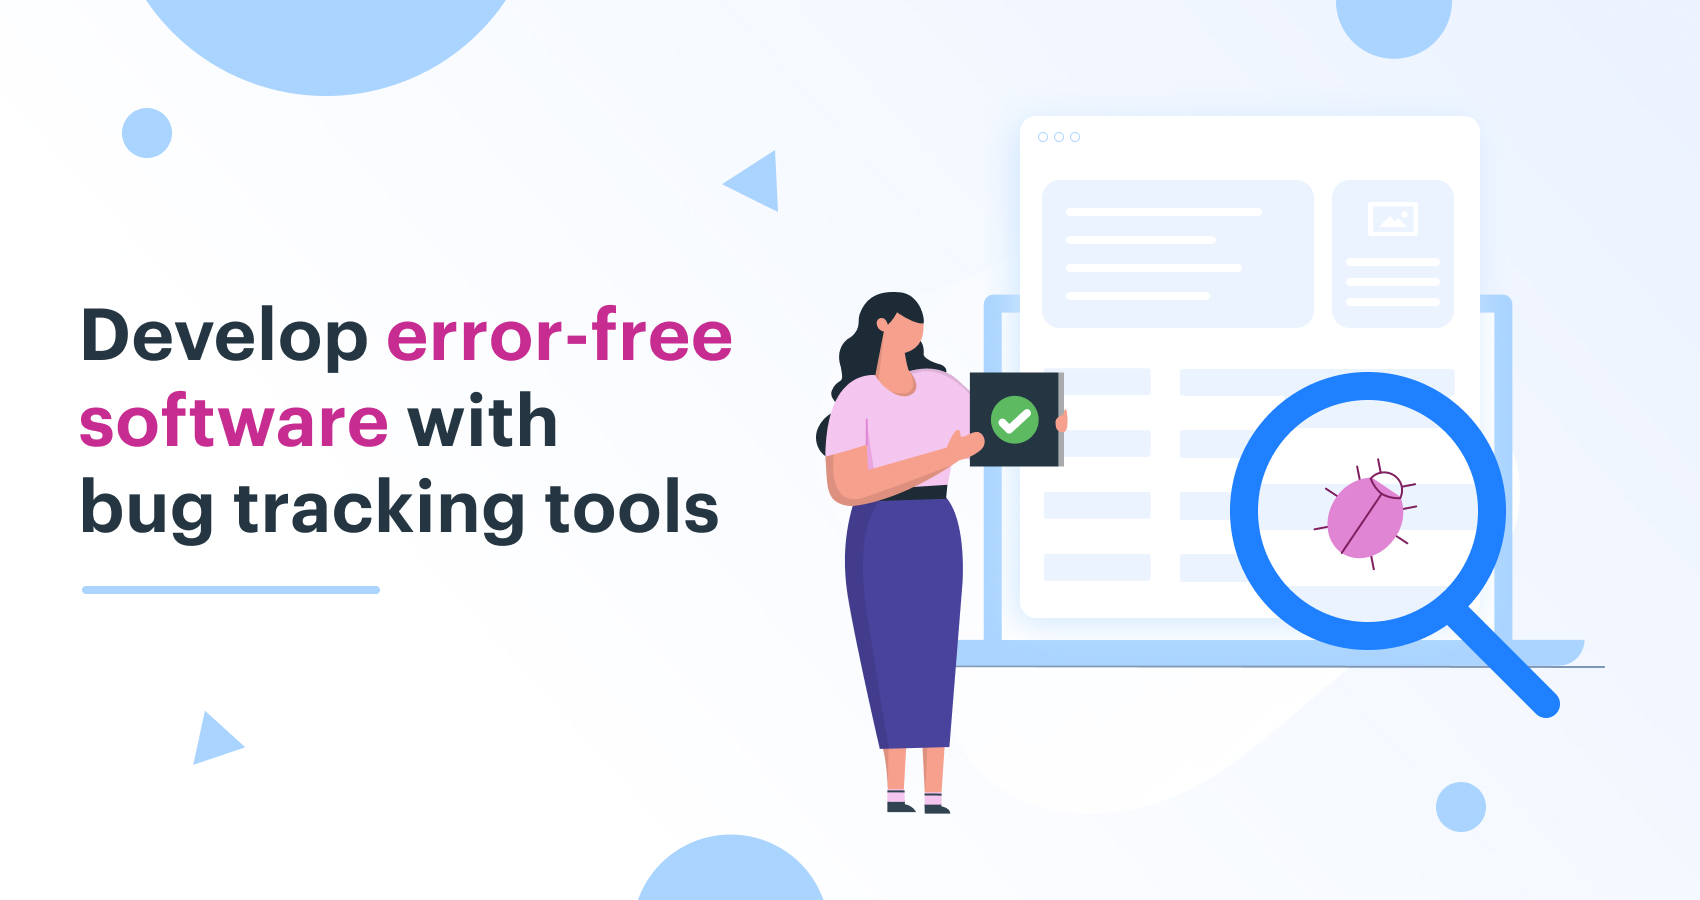 How Bug Tracking Tools Helps Developing Error-Free Software